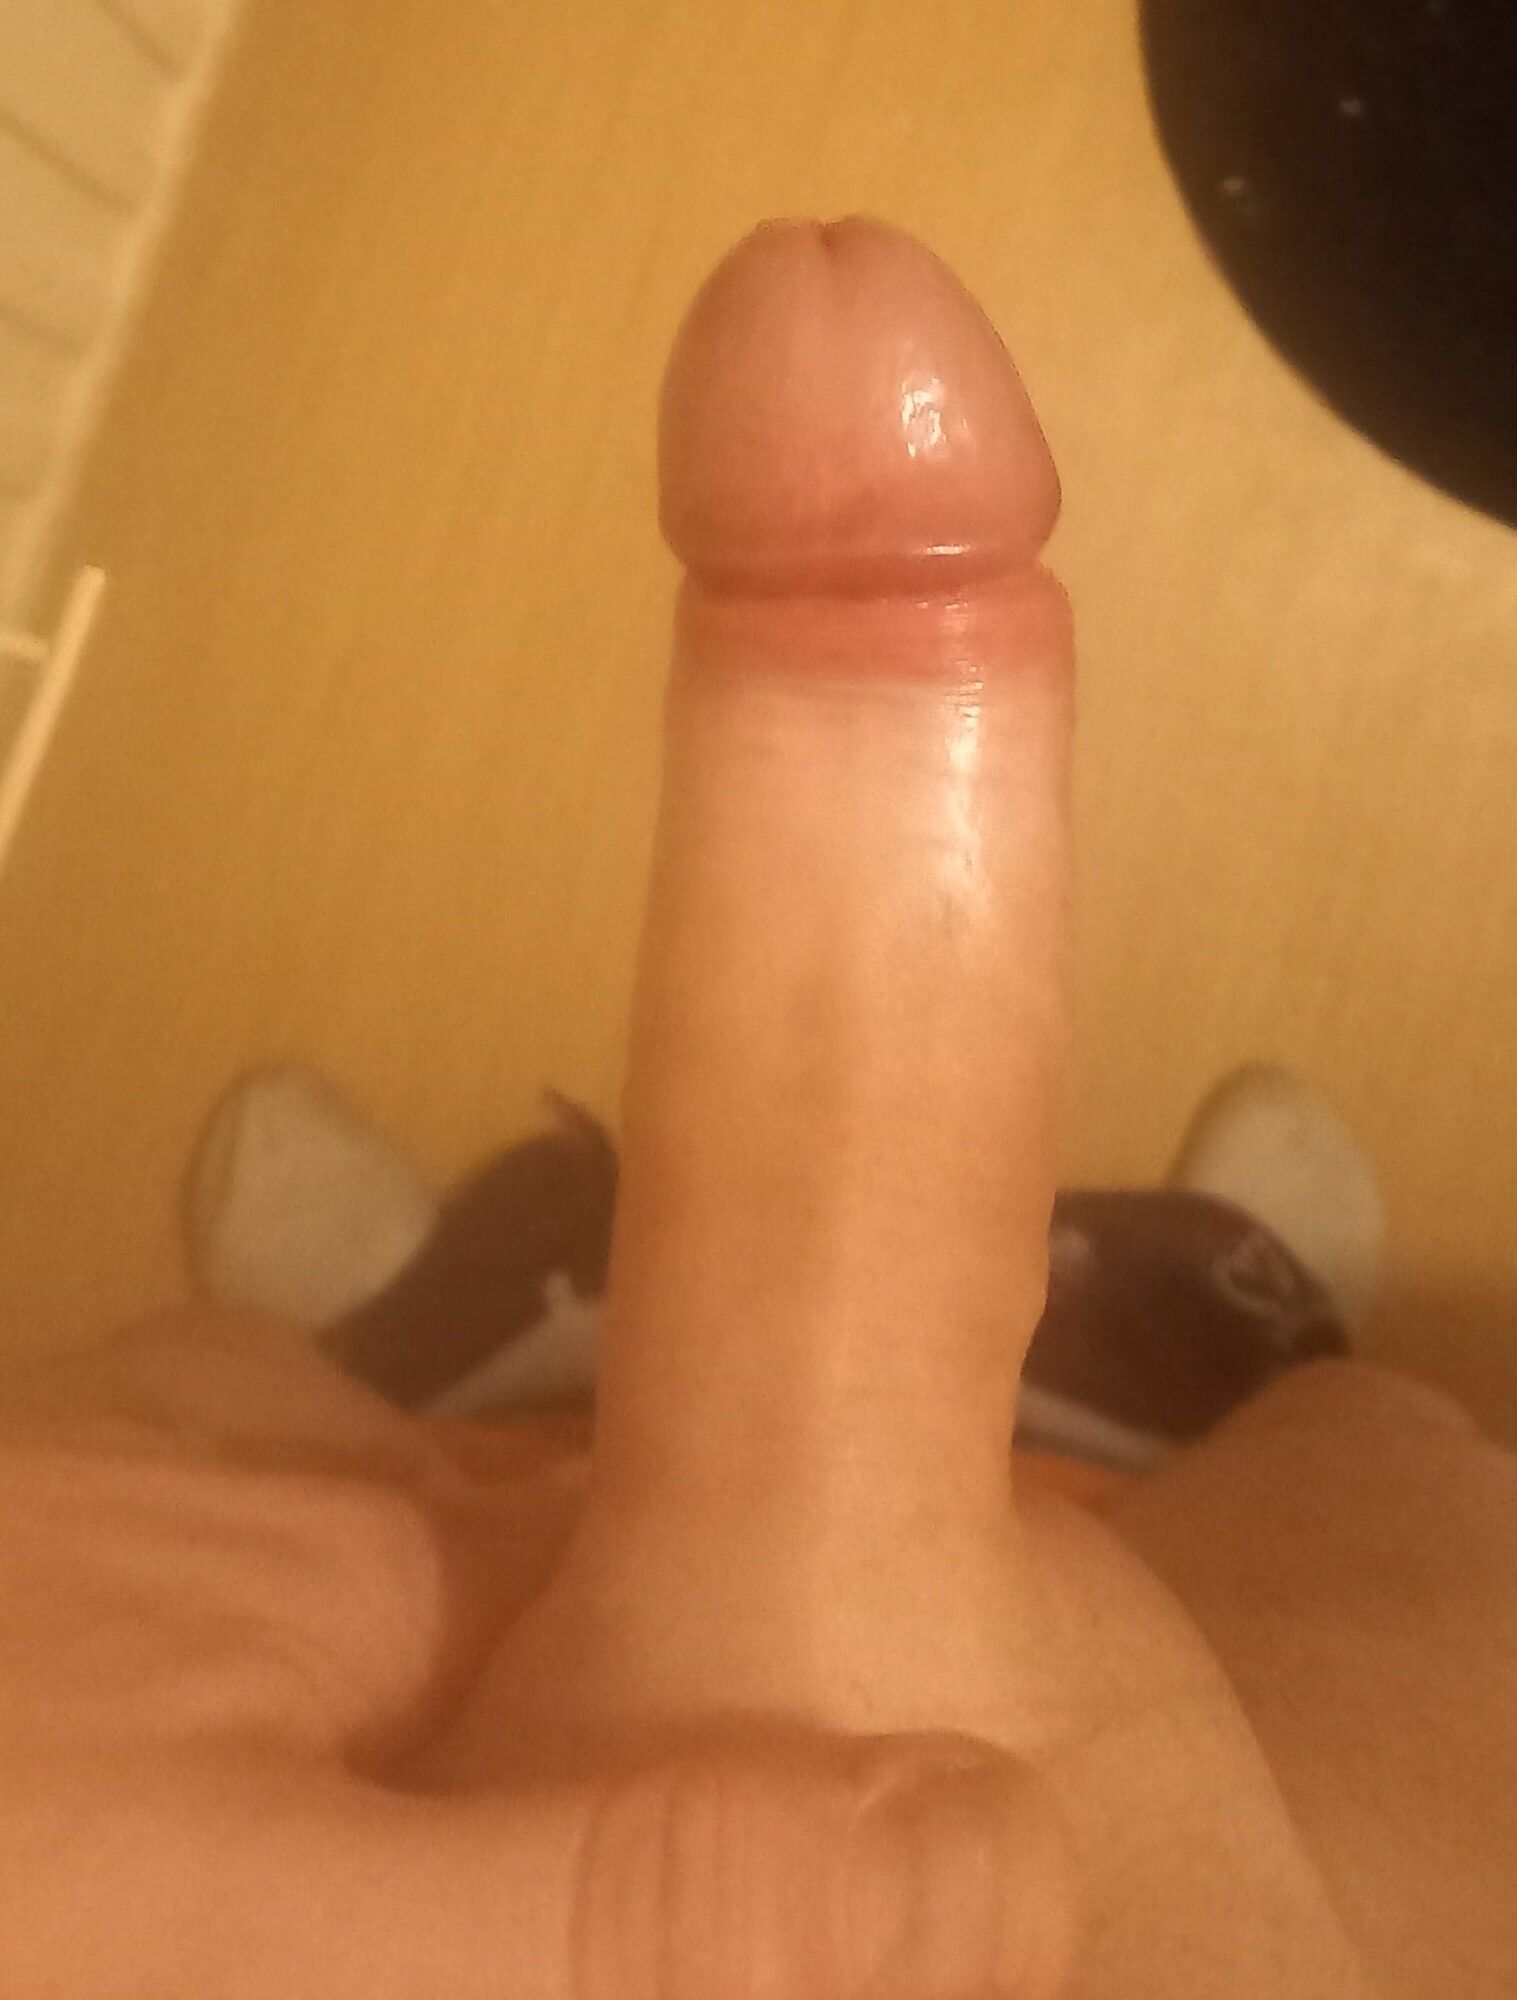 Some more cock